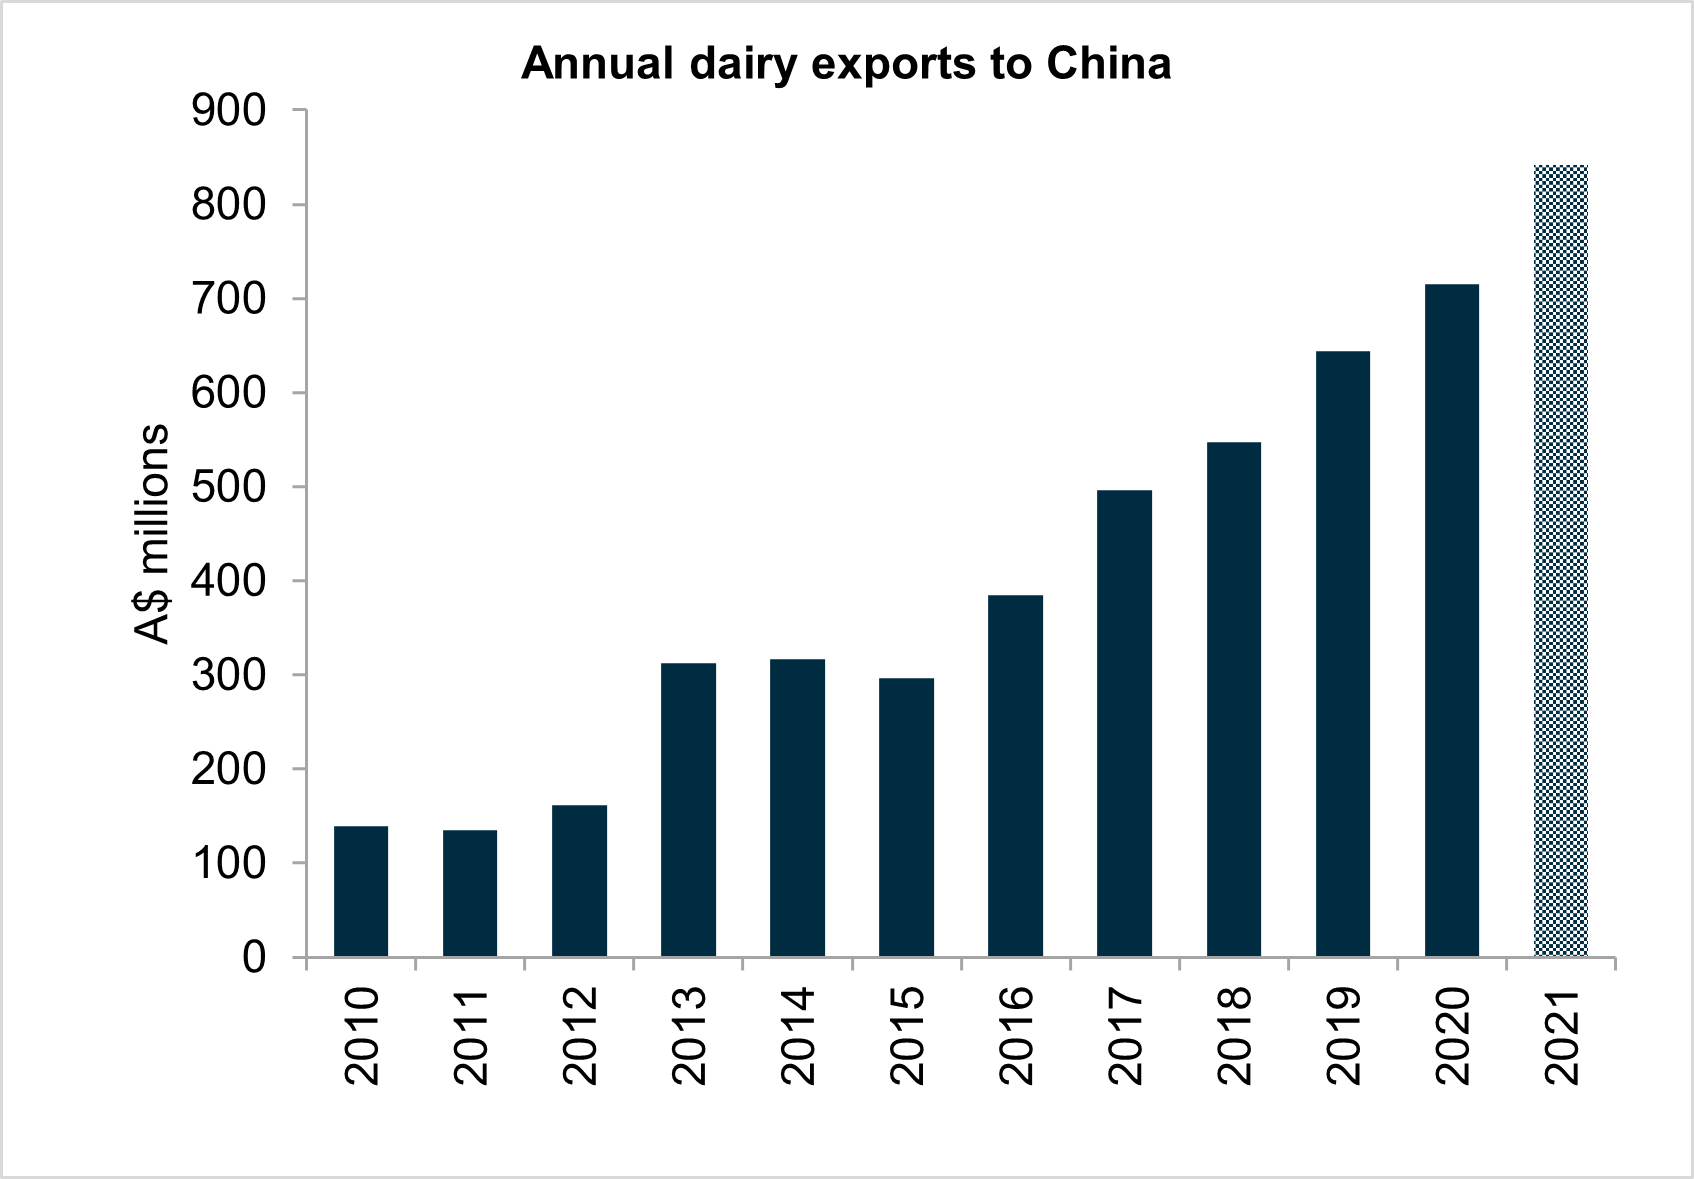 Annual dairy export to China from 2010 to 2021. Australian dairy exports to China have reached a record high in 2021.

